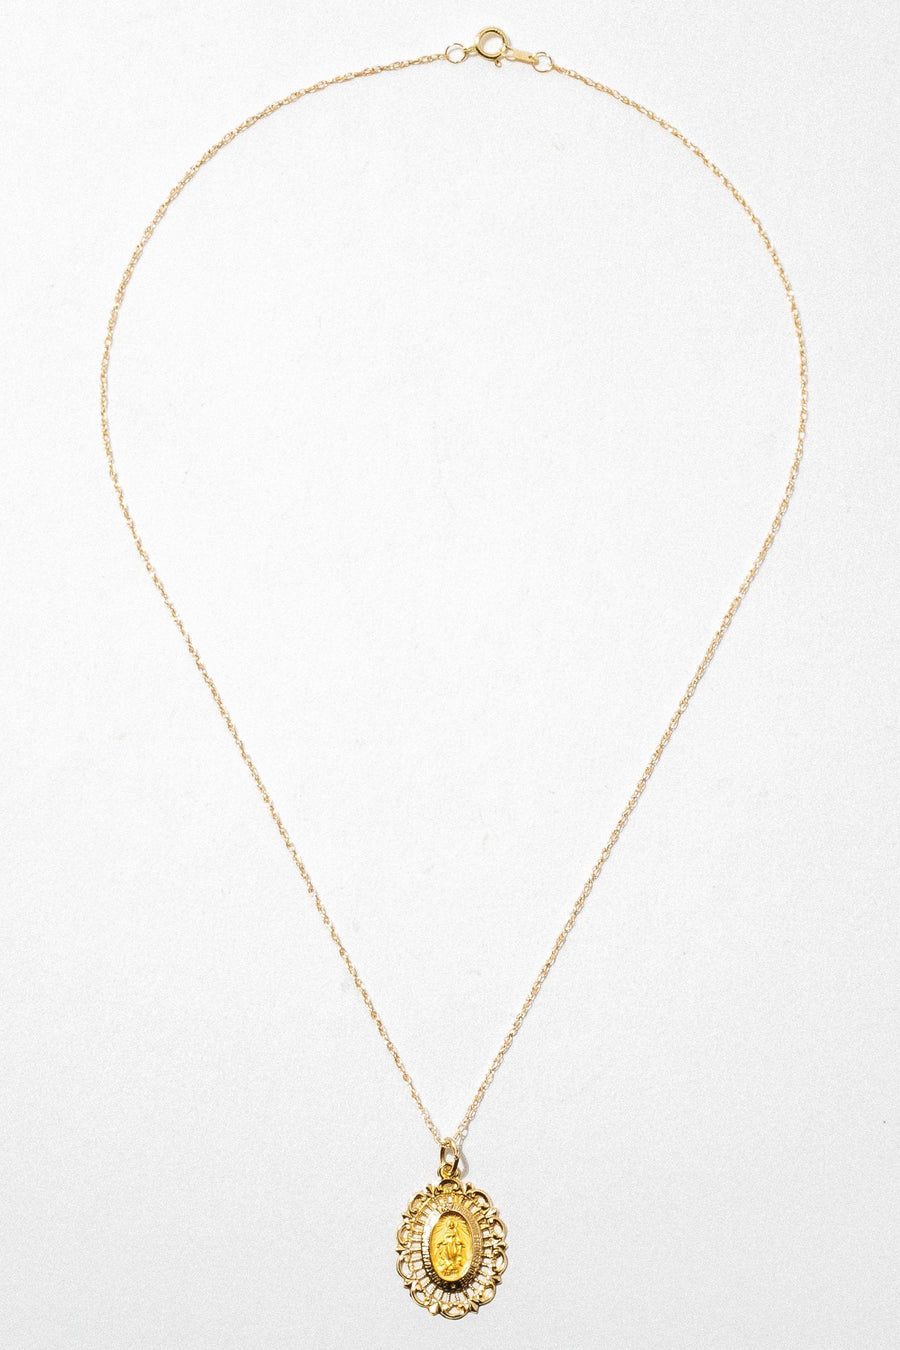 Stuller Jewelry Gold / 16 Inches Michelangelo Necklace